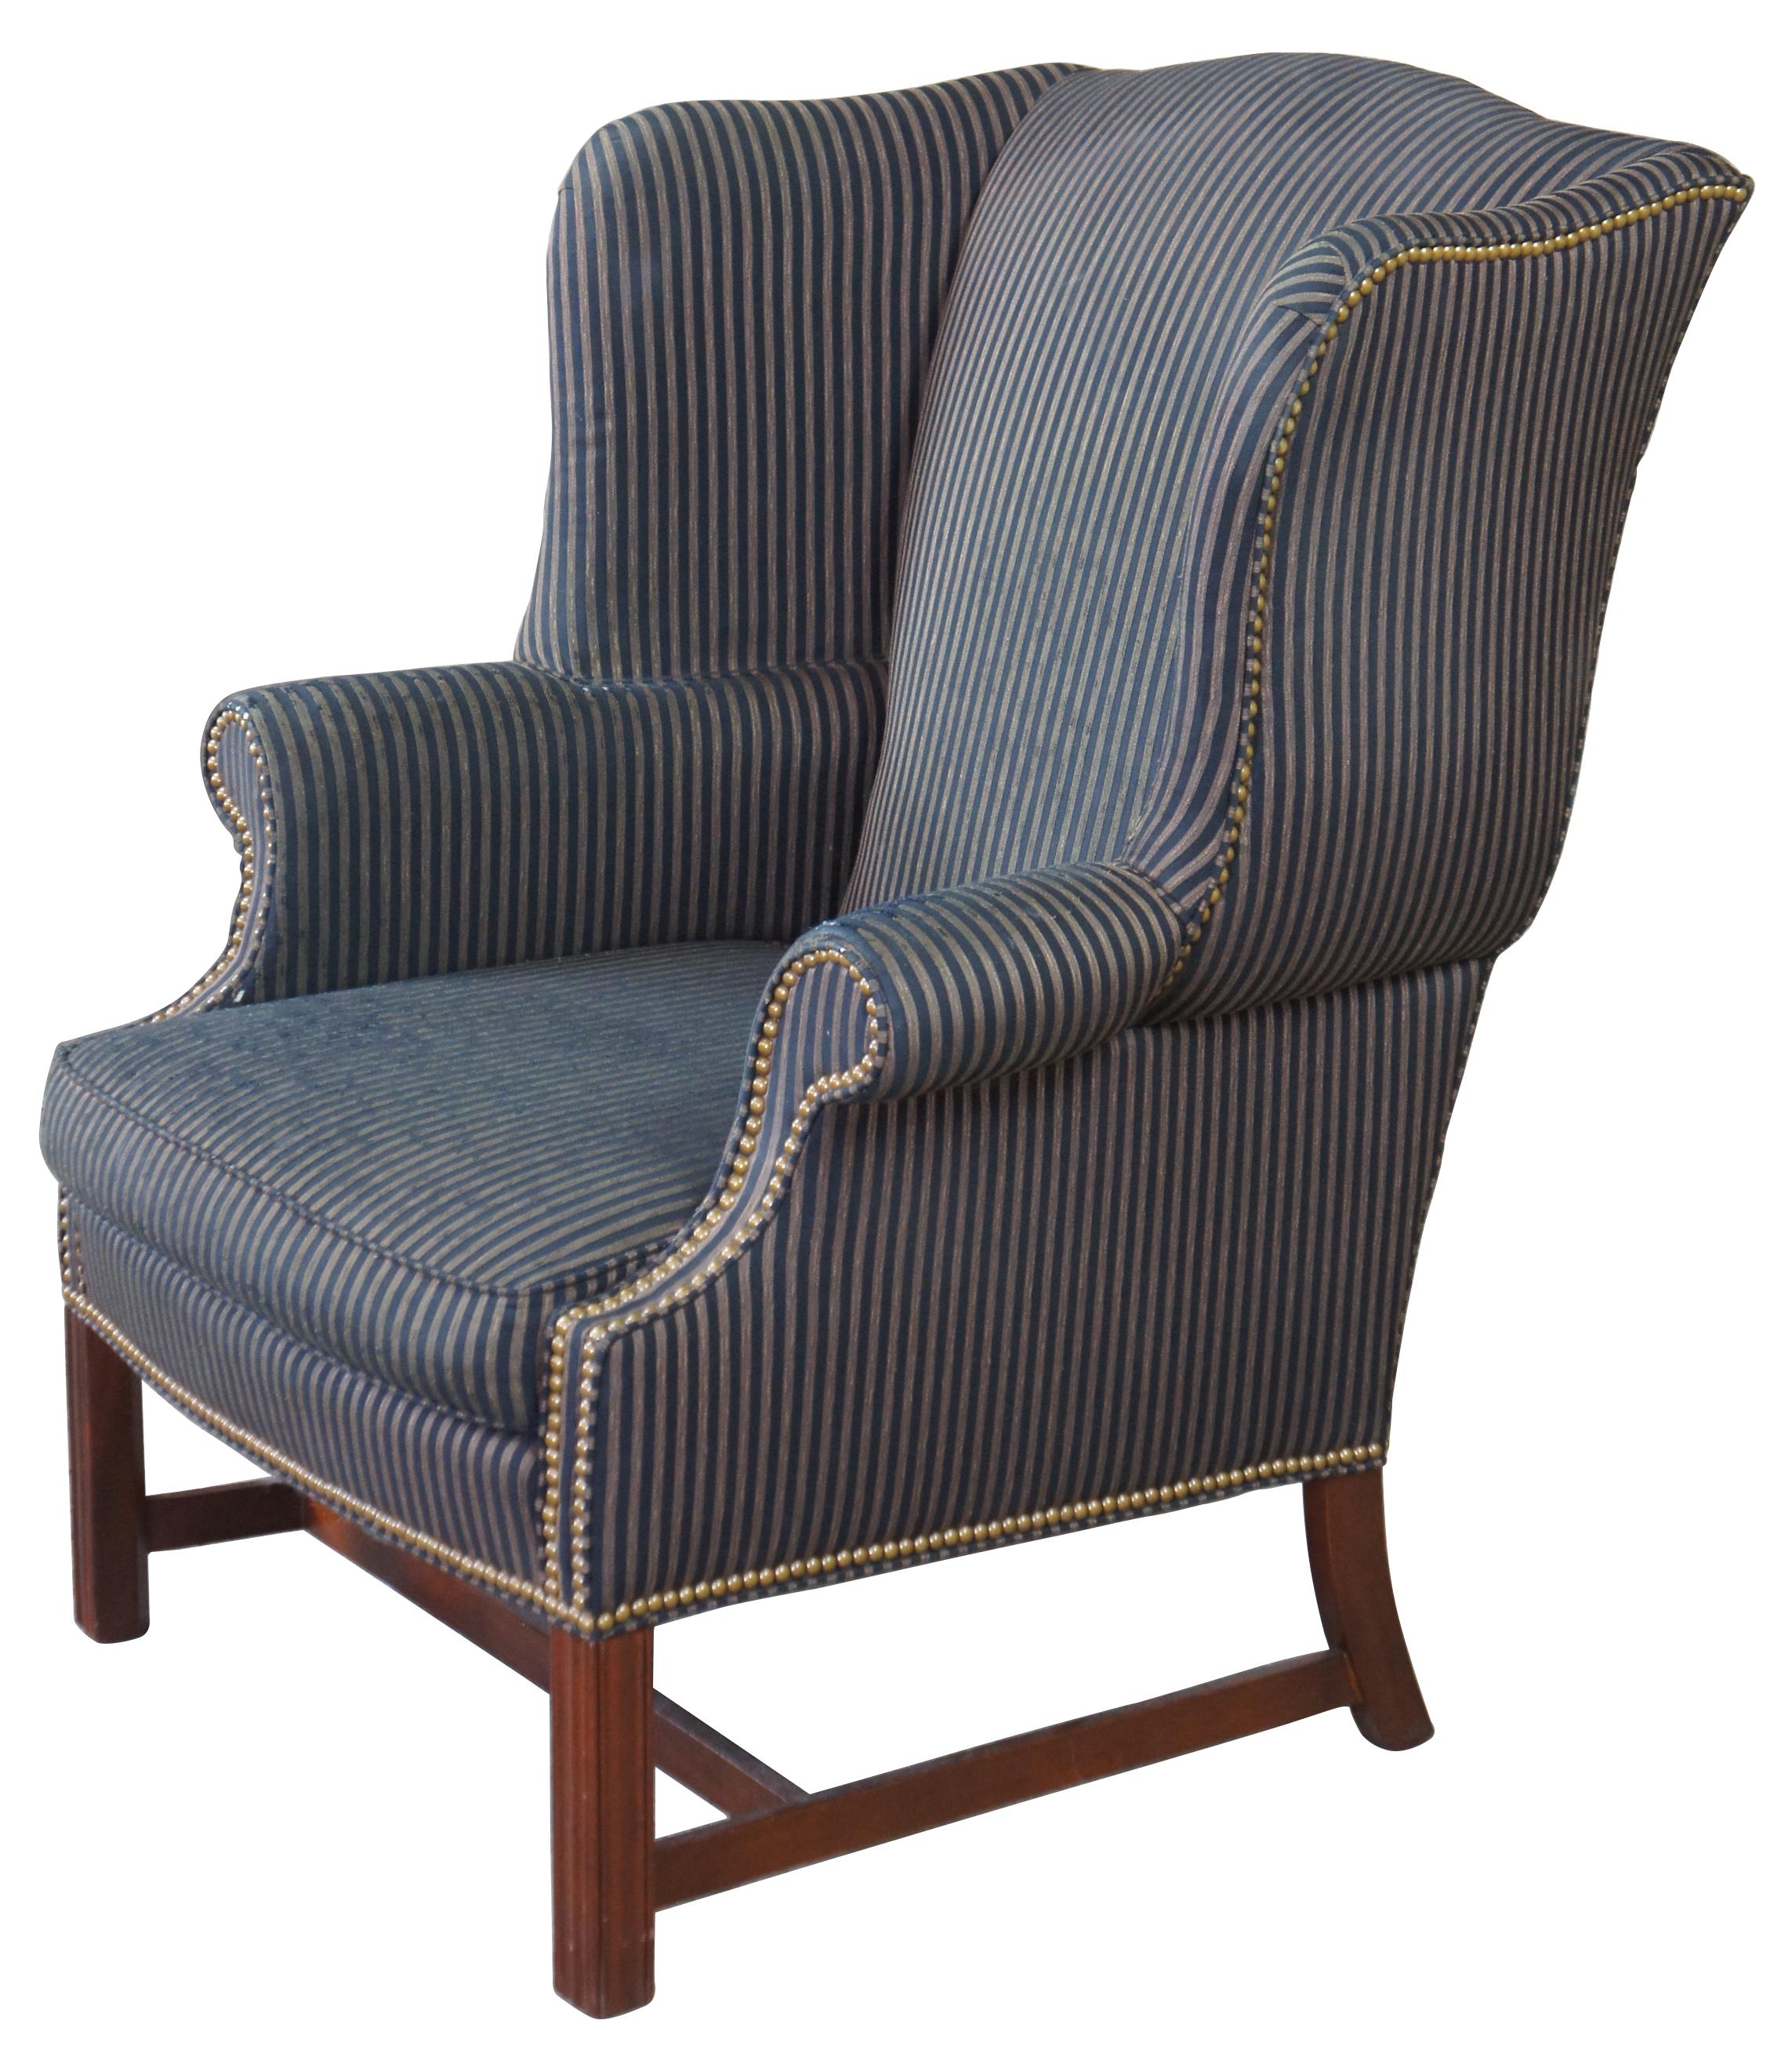 Vintage Pearson Furniture George III or Chippendale wingback chair. Made from mahogany, featuring a rolled arm with high flared wingback covered in a distressed blue pinstripe fabric accented with nailhead trim.
 